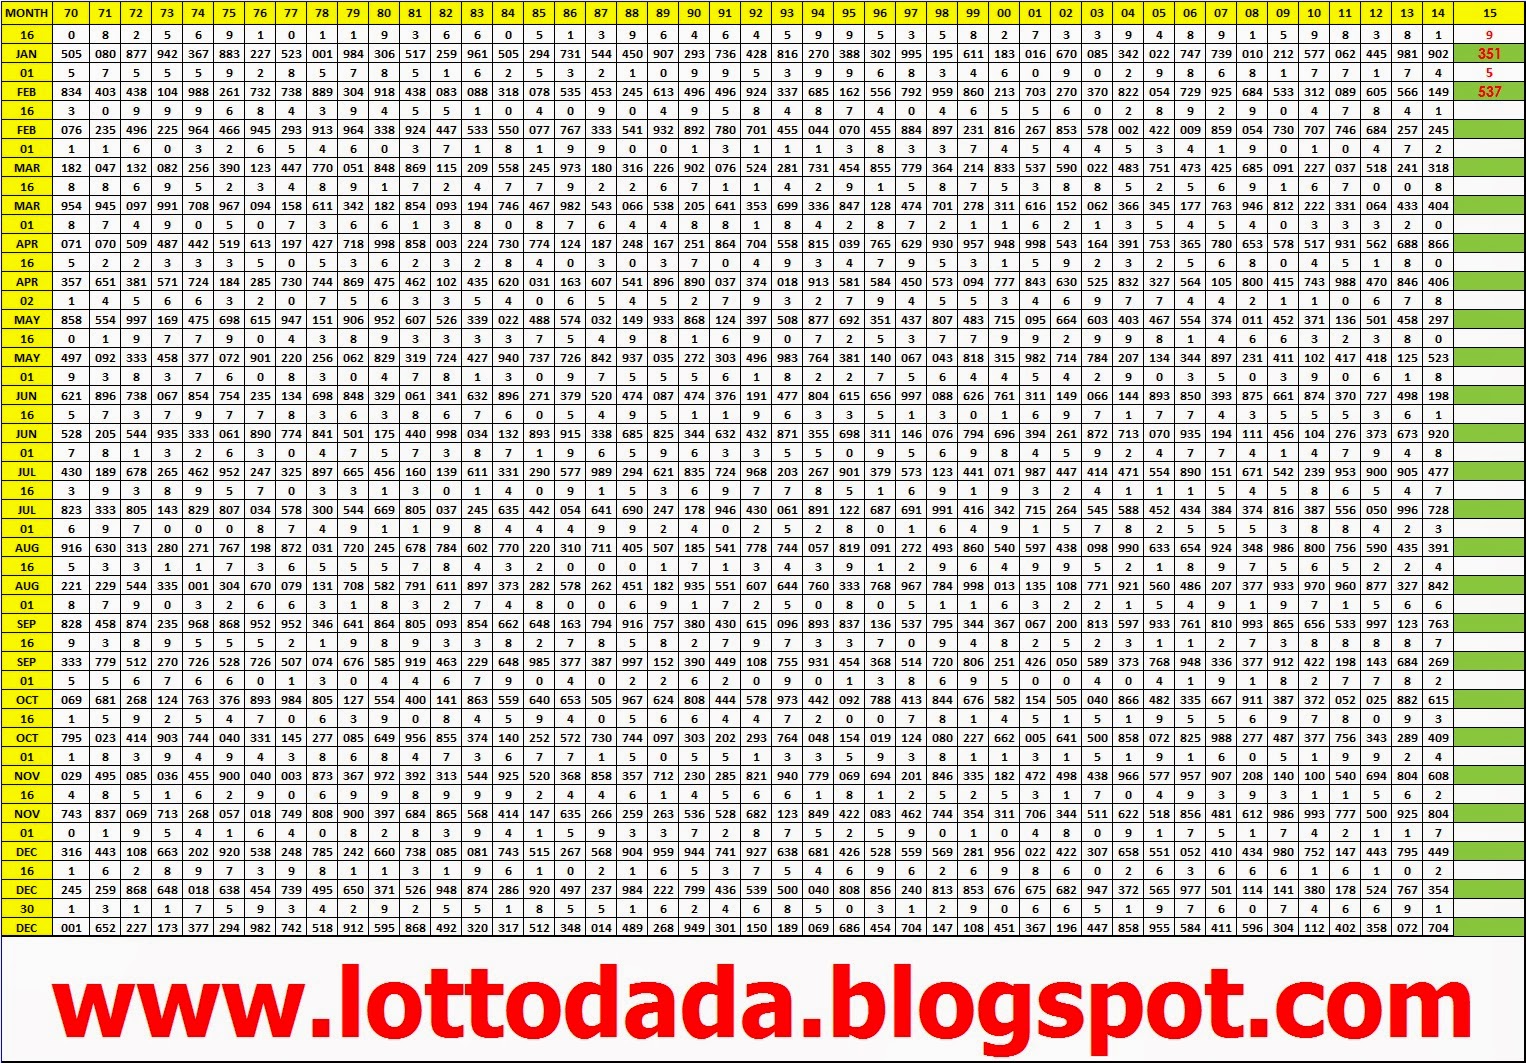 Thai Lotto Result Chart Excel 2018